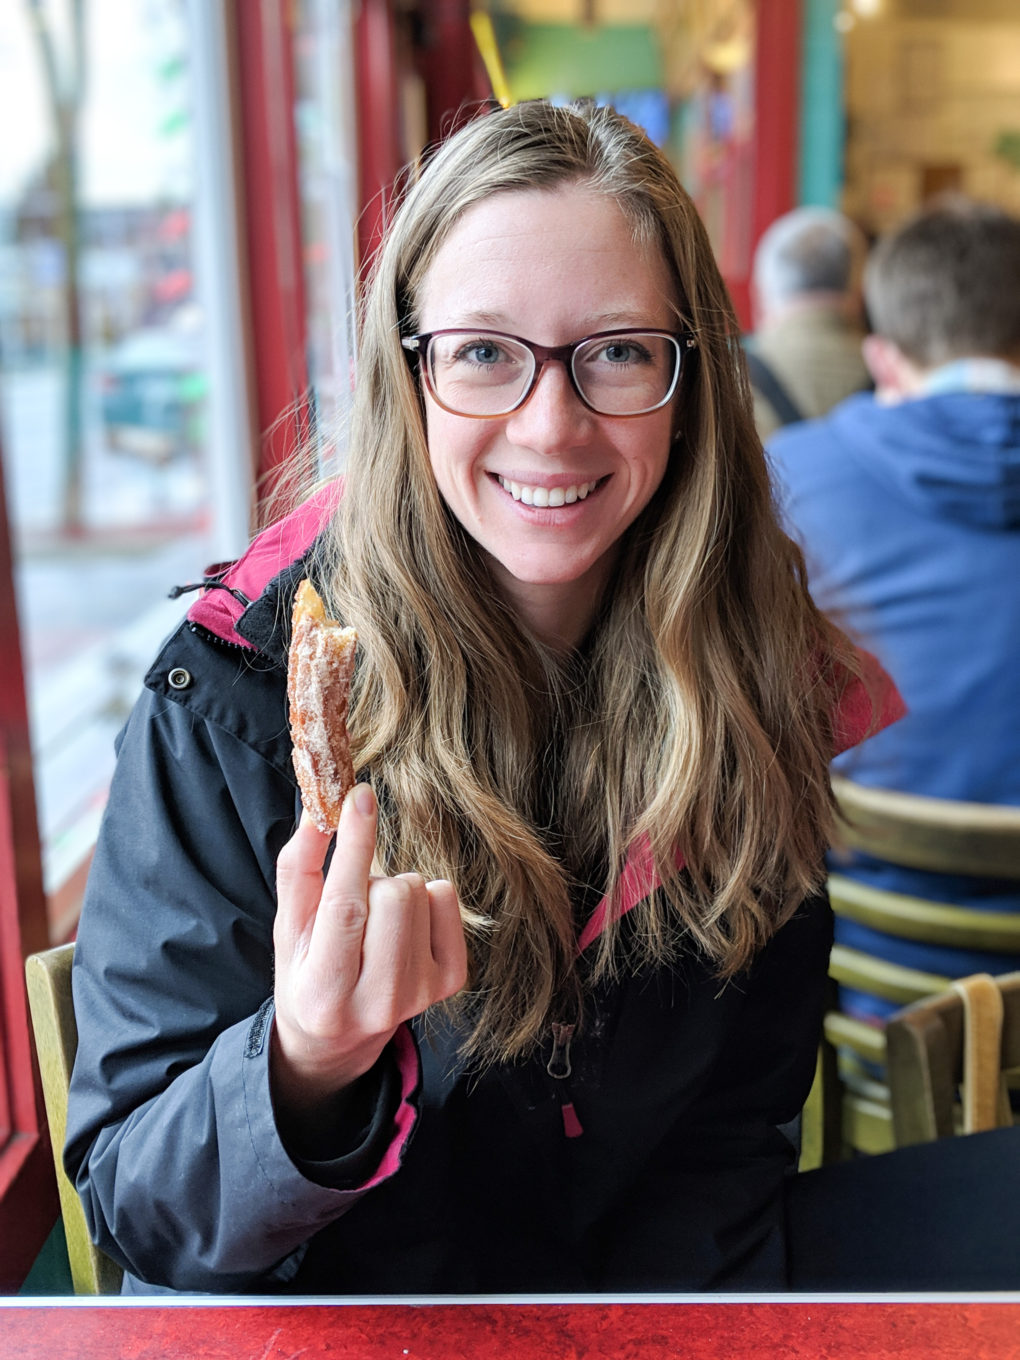 TNT Taqueria churro - How to visit Seattle with kids on a 3 day trip. Where to eat.